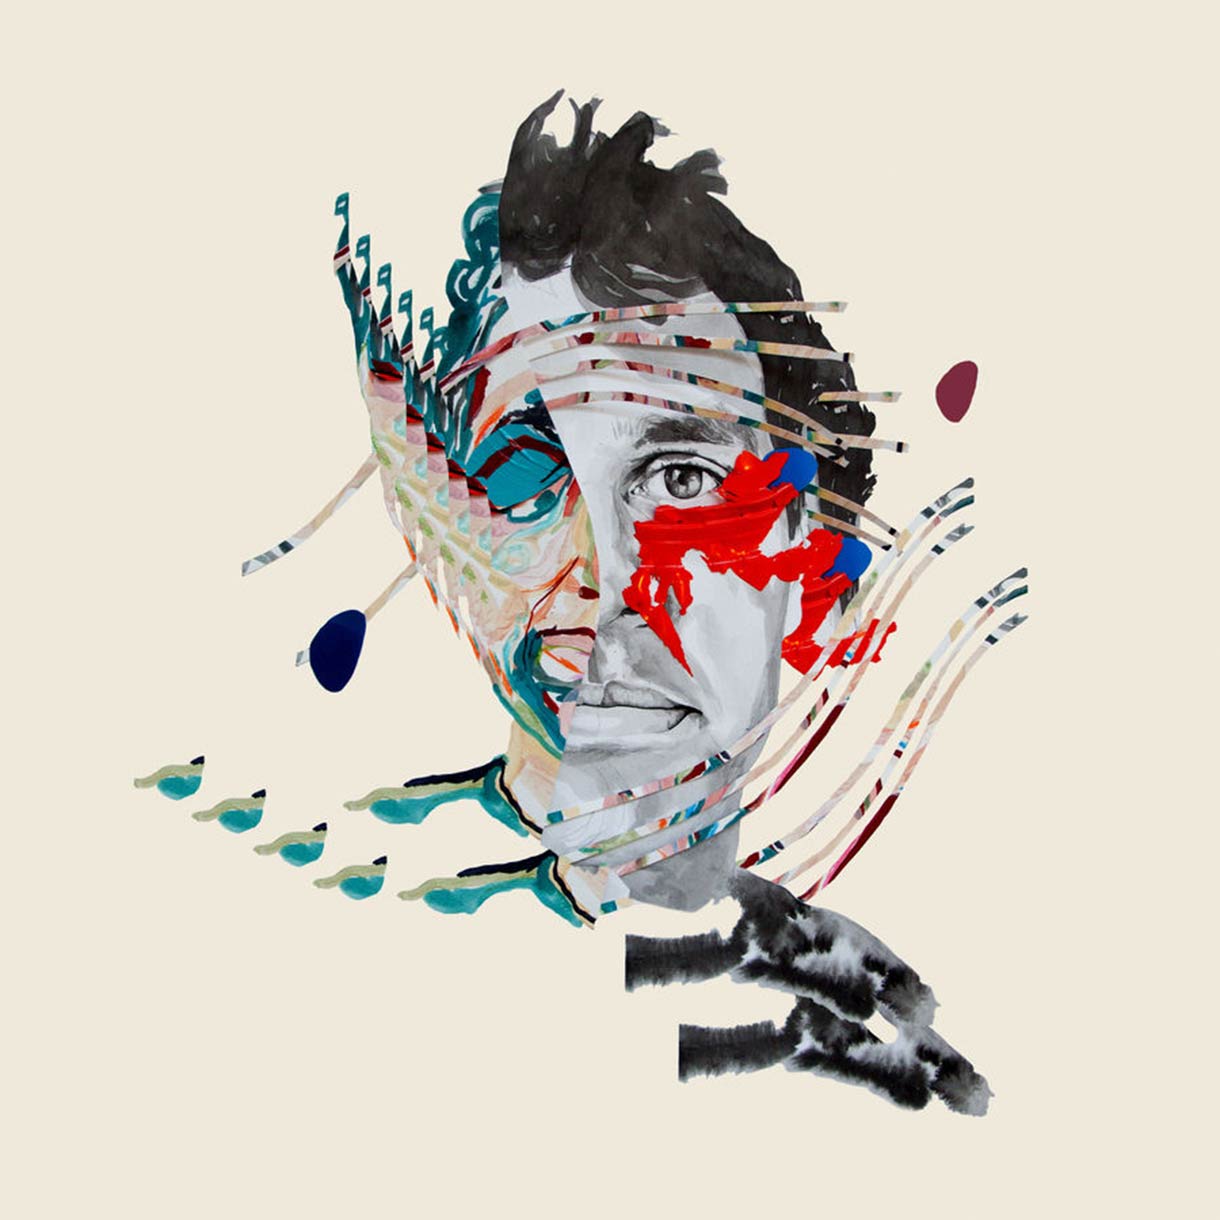 ANIMAL COLLECTIVE "Painting With"